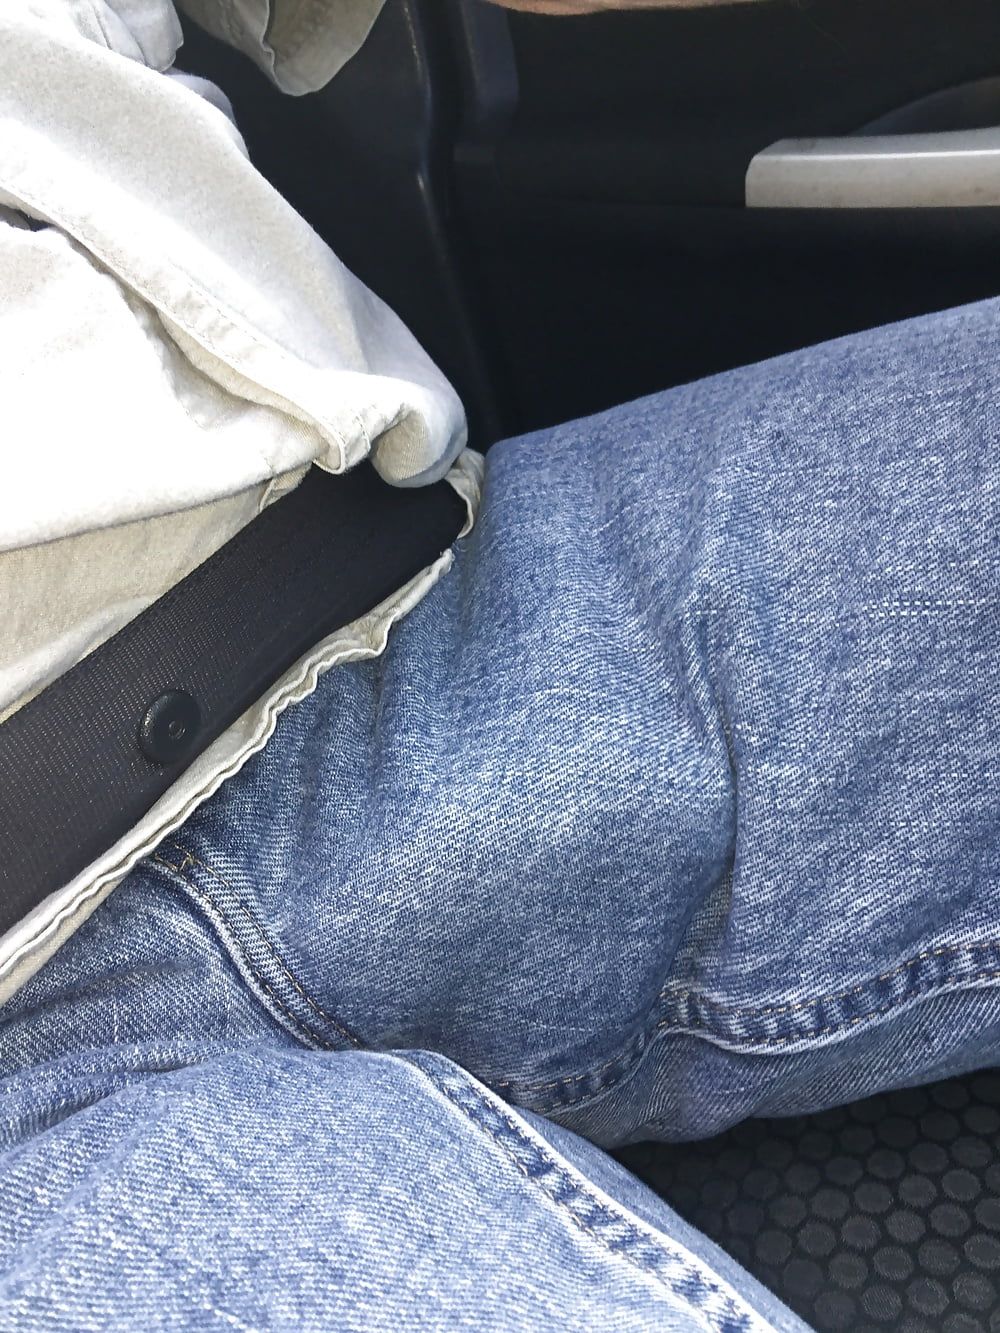 Big hard cock in Jeans